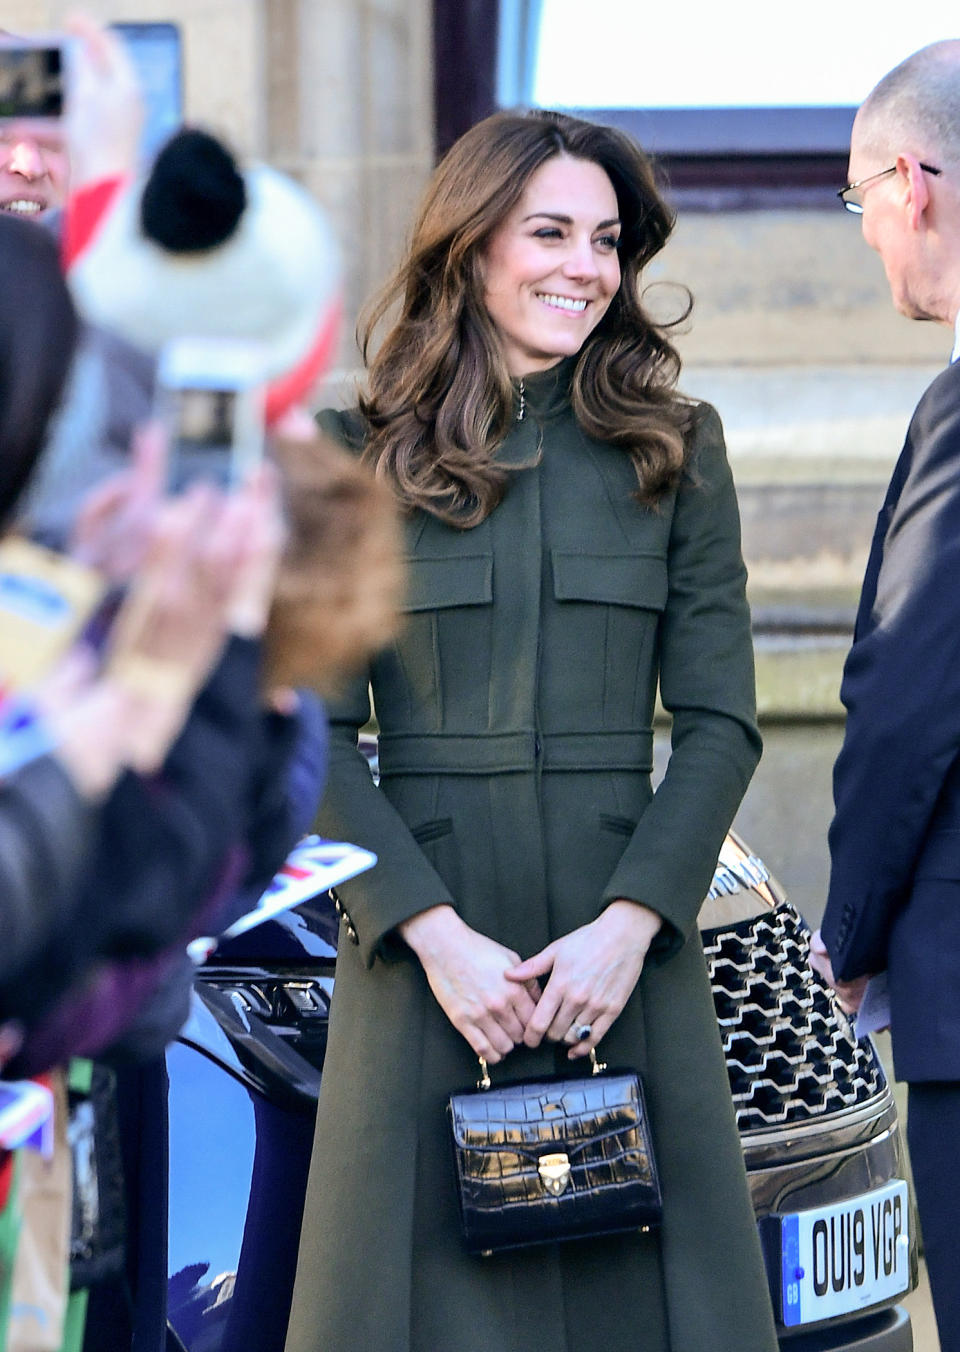 BRADFORD, ENGLAND - JANUARY 15: The Duchess of Cambridge visits City Hall in Bradford's Centenary Square, to join a group of young people from across the community to hear about life in Bradford, on January 15, 2020 in Bradford, United Kingdom. (Photo by Samir Hussein/WireImage)